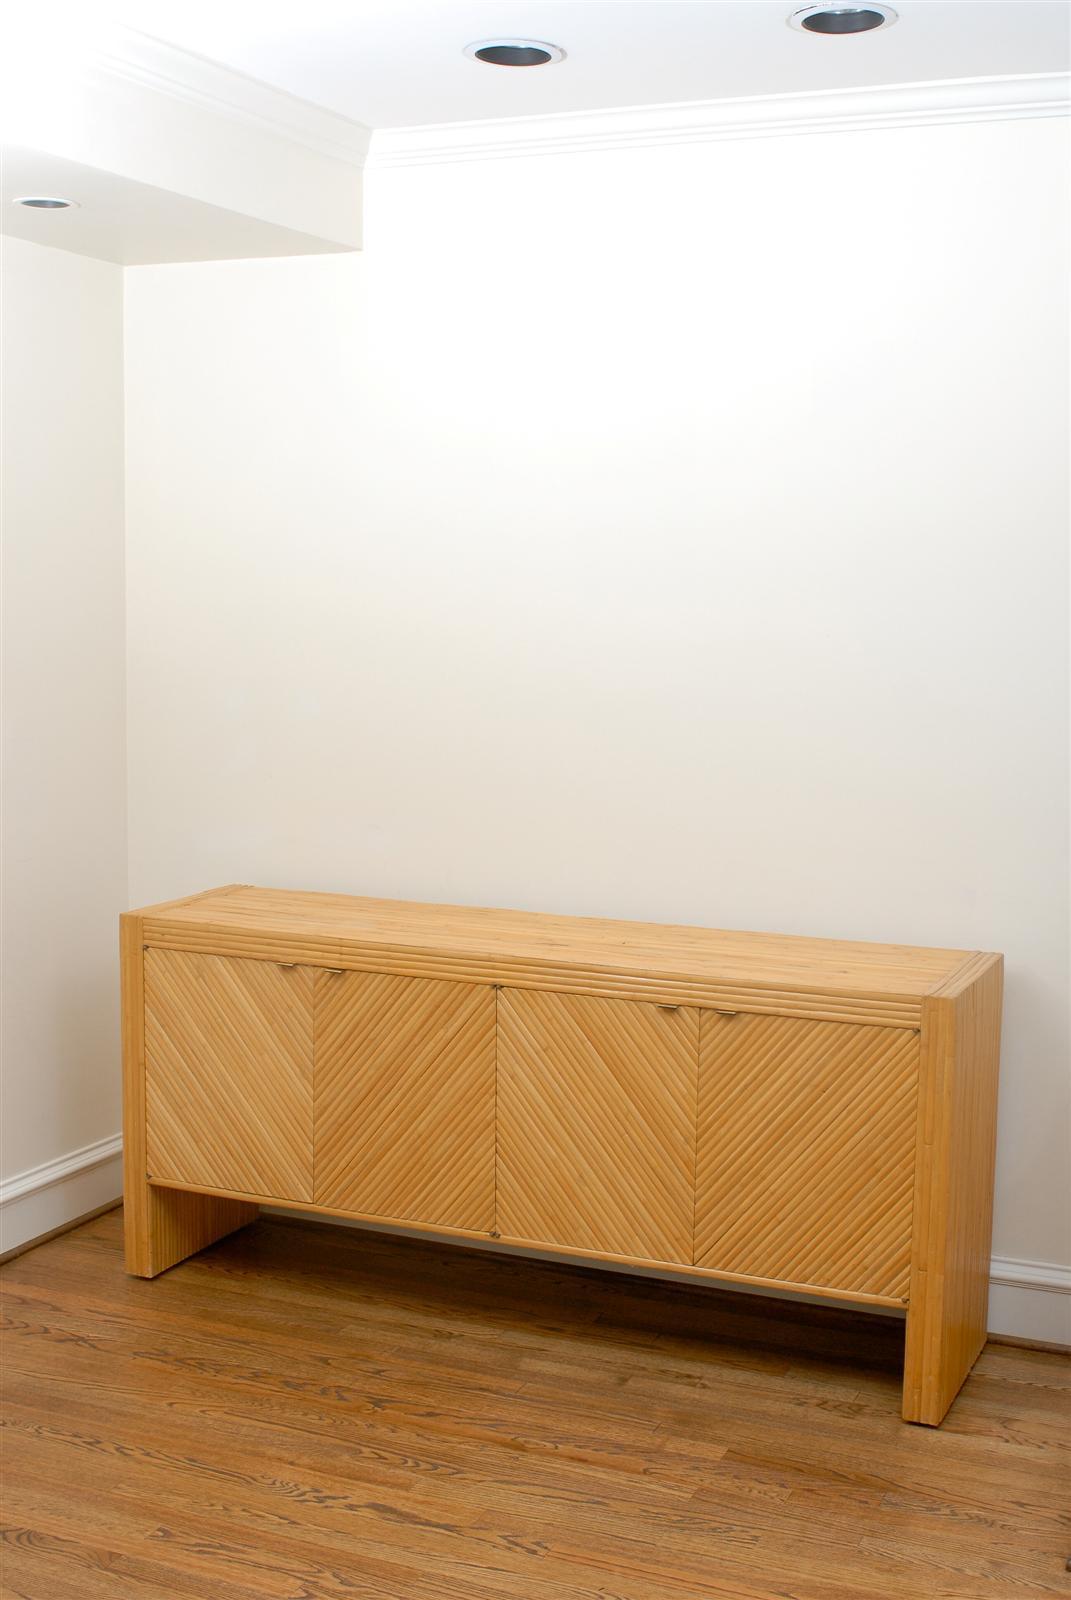 This magnificent chest is shipped as professionally photographed and described in the listing narrative: Completely Installation Ready.


A fabulous meticulously restored four-door cabinet, circa 1975. Expertly made split bamboo veneer over mahogany